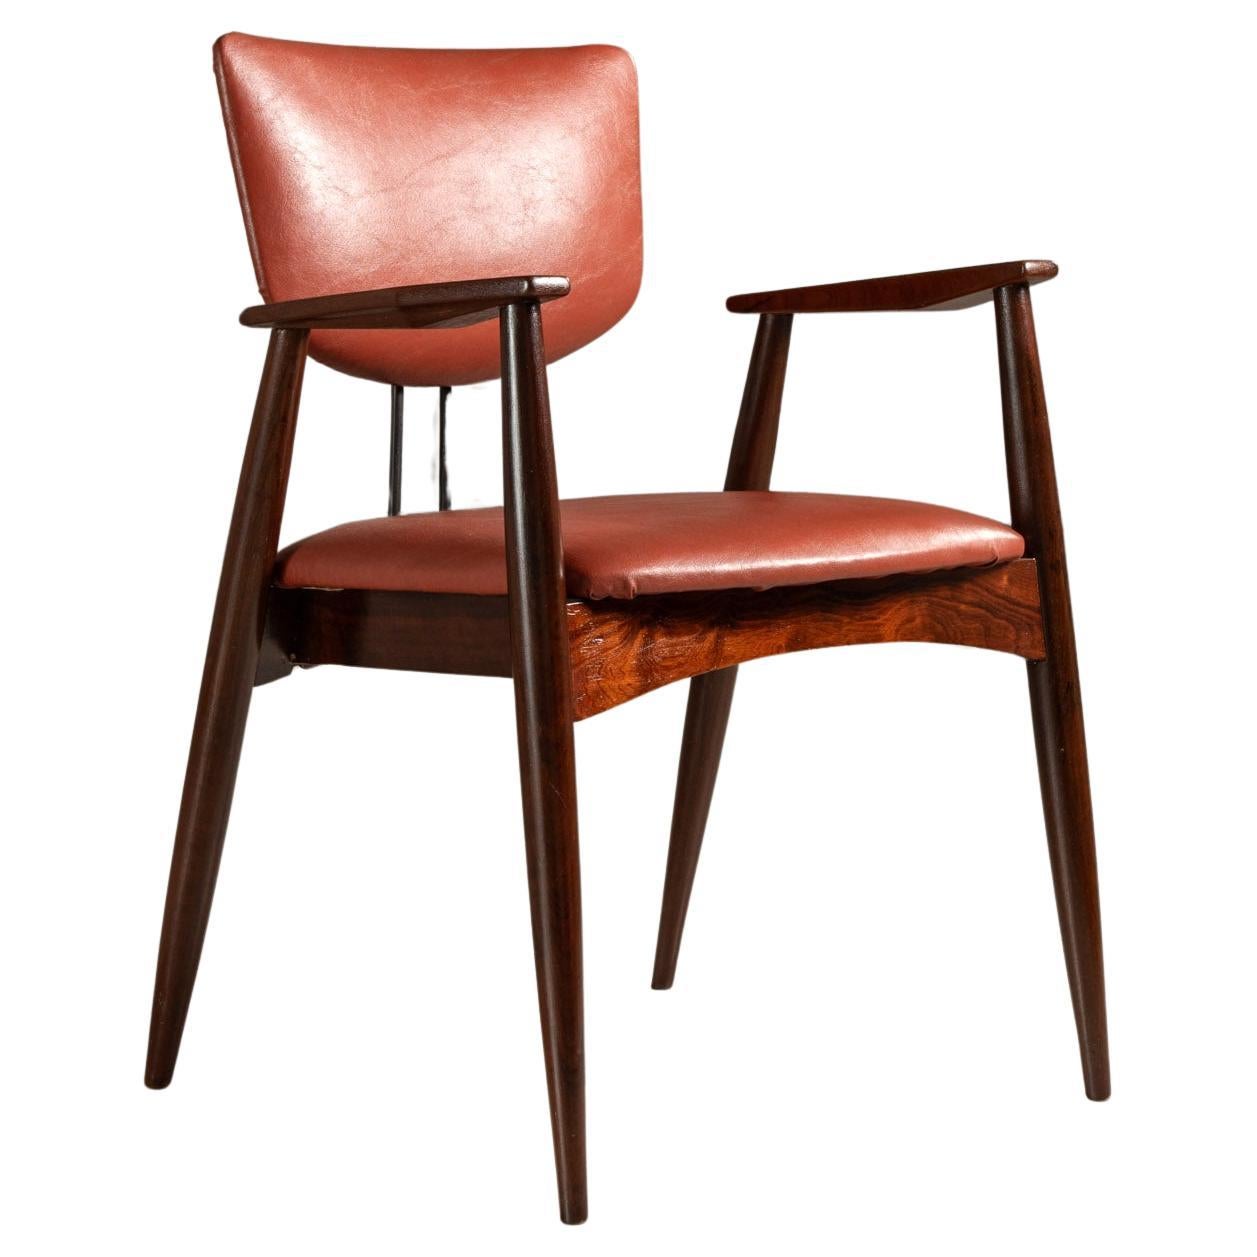 Chair in Wood, Iron and Leather, by Michel Arnoult, Brazilian Mid-Century Modern